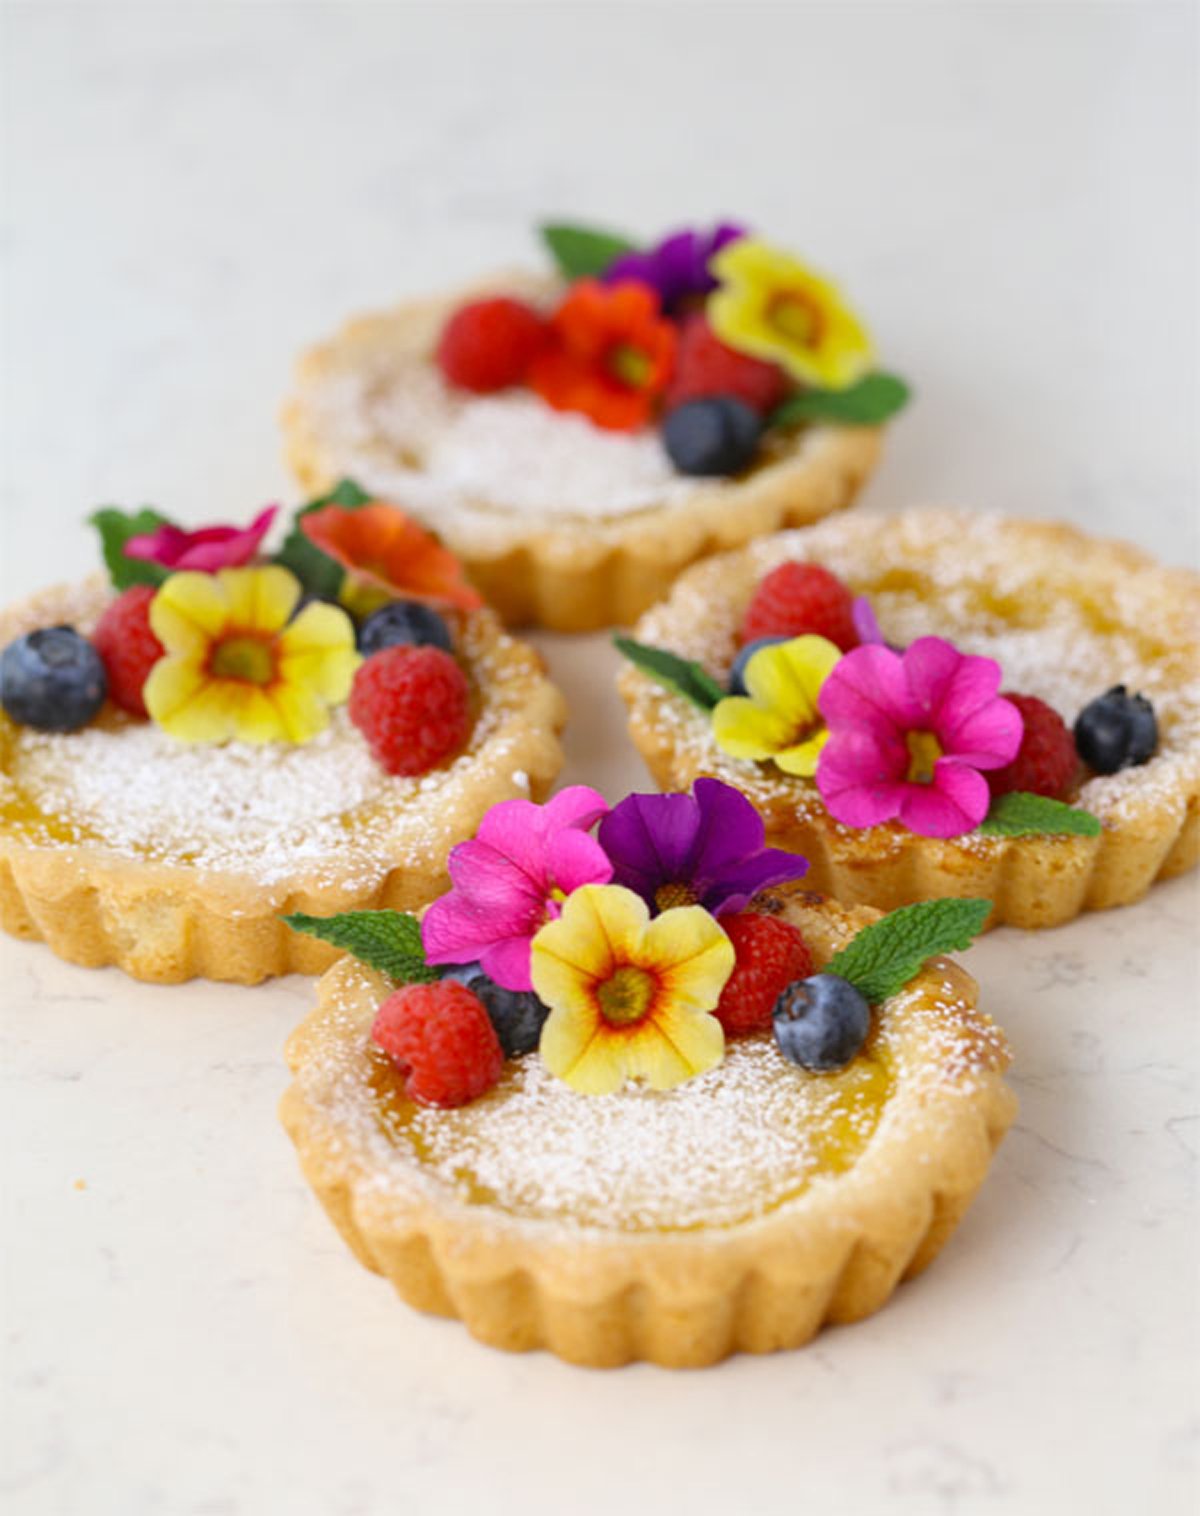 Beautifully presented lemon tarts with edible flowers on top.